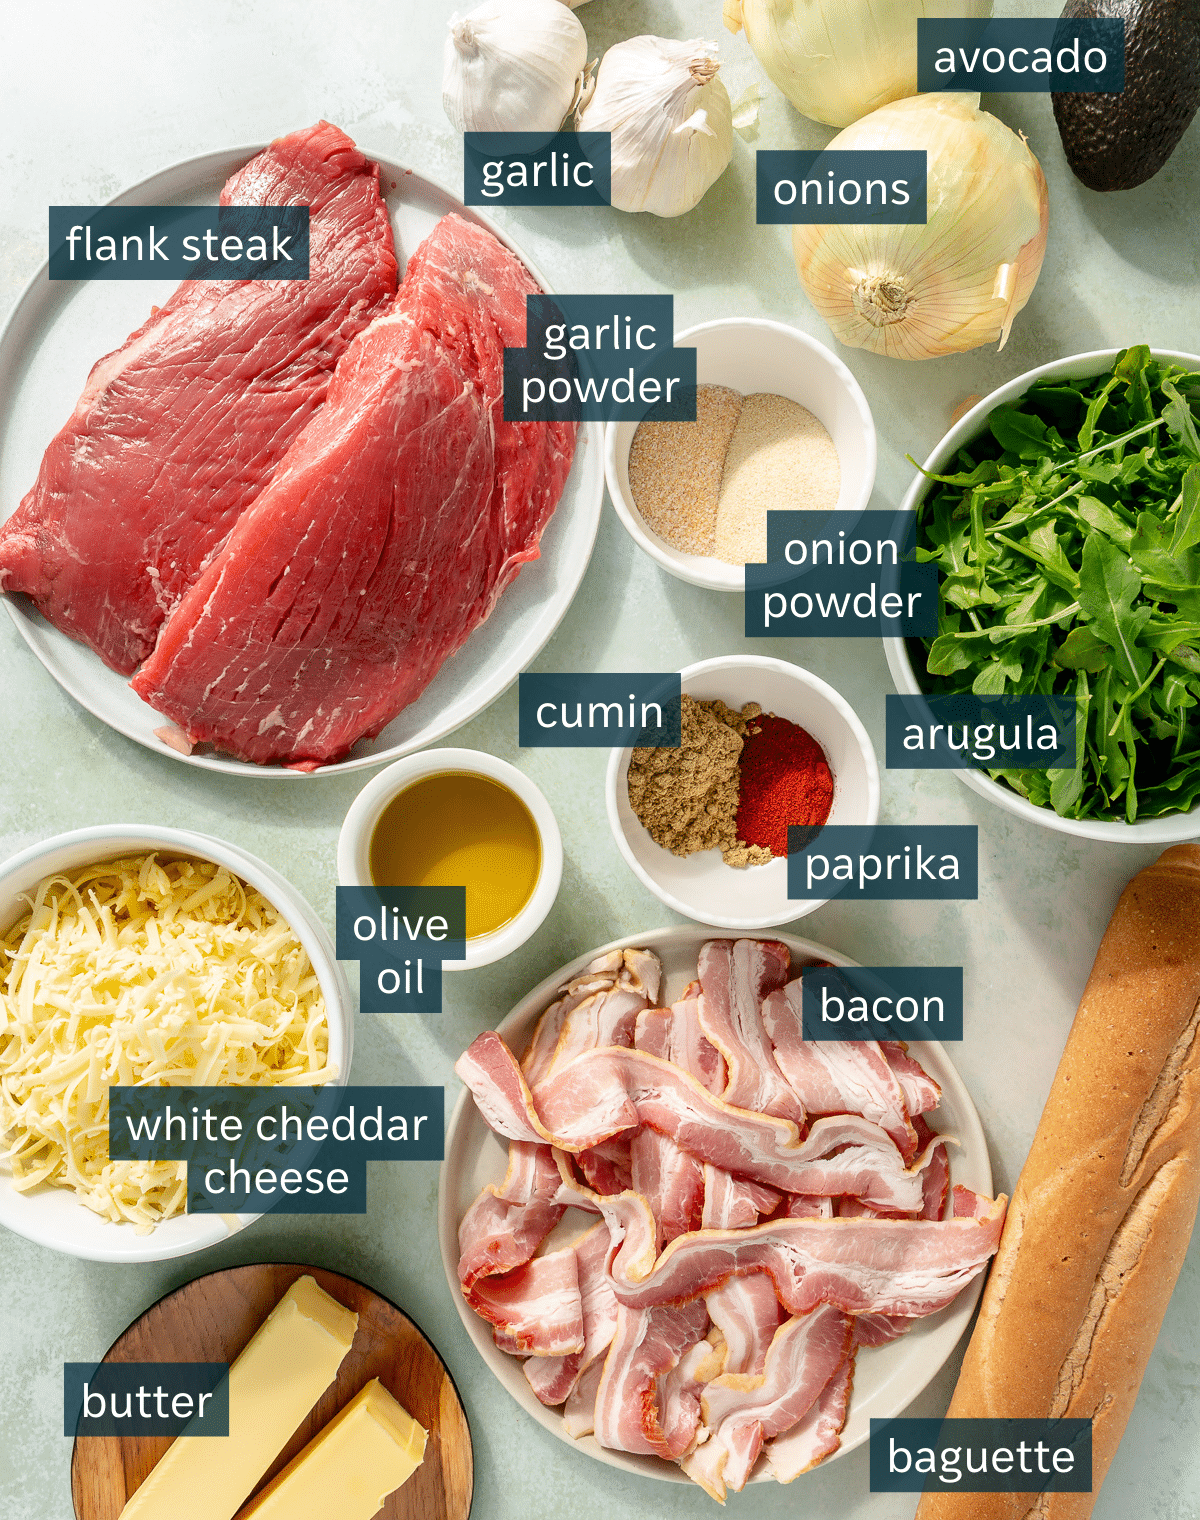 Ingredients for steak sandwiches sit in a variety of bowls on a light blue surface.